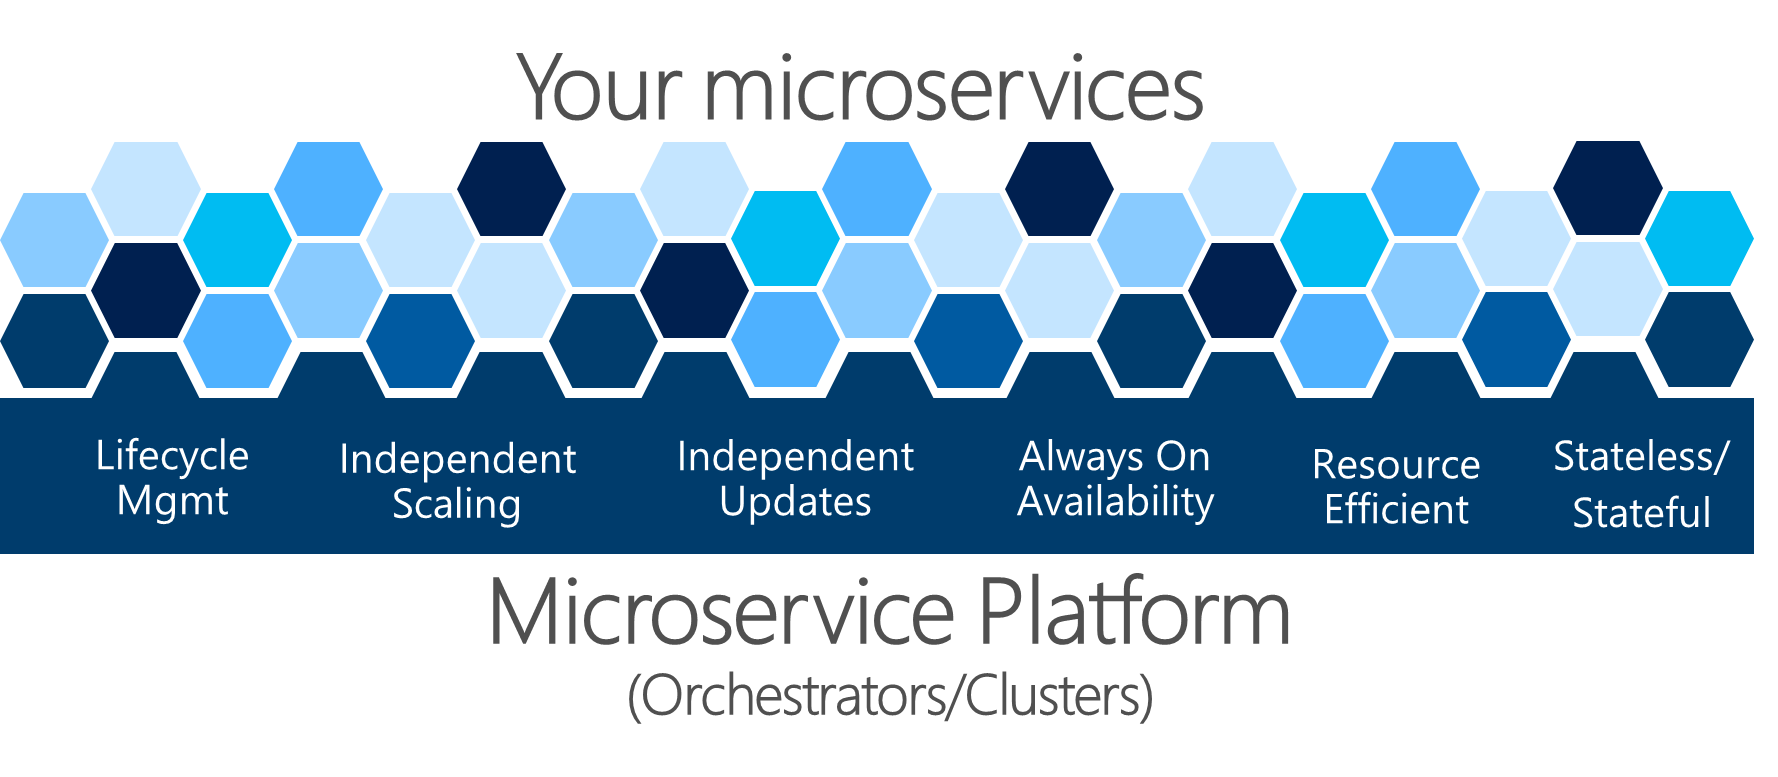 Resiliency and high availability in microservices | Microsoft Docs